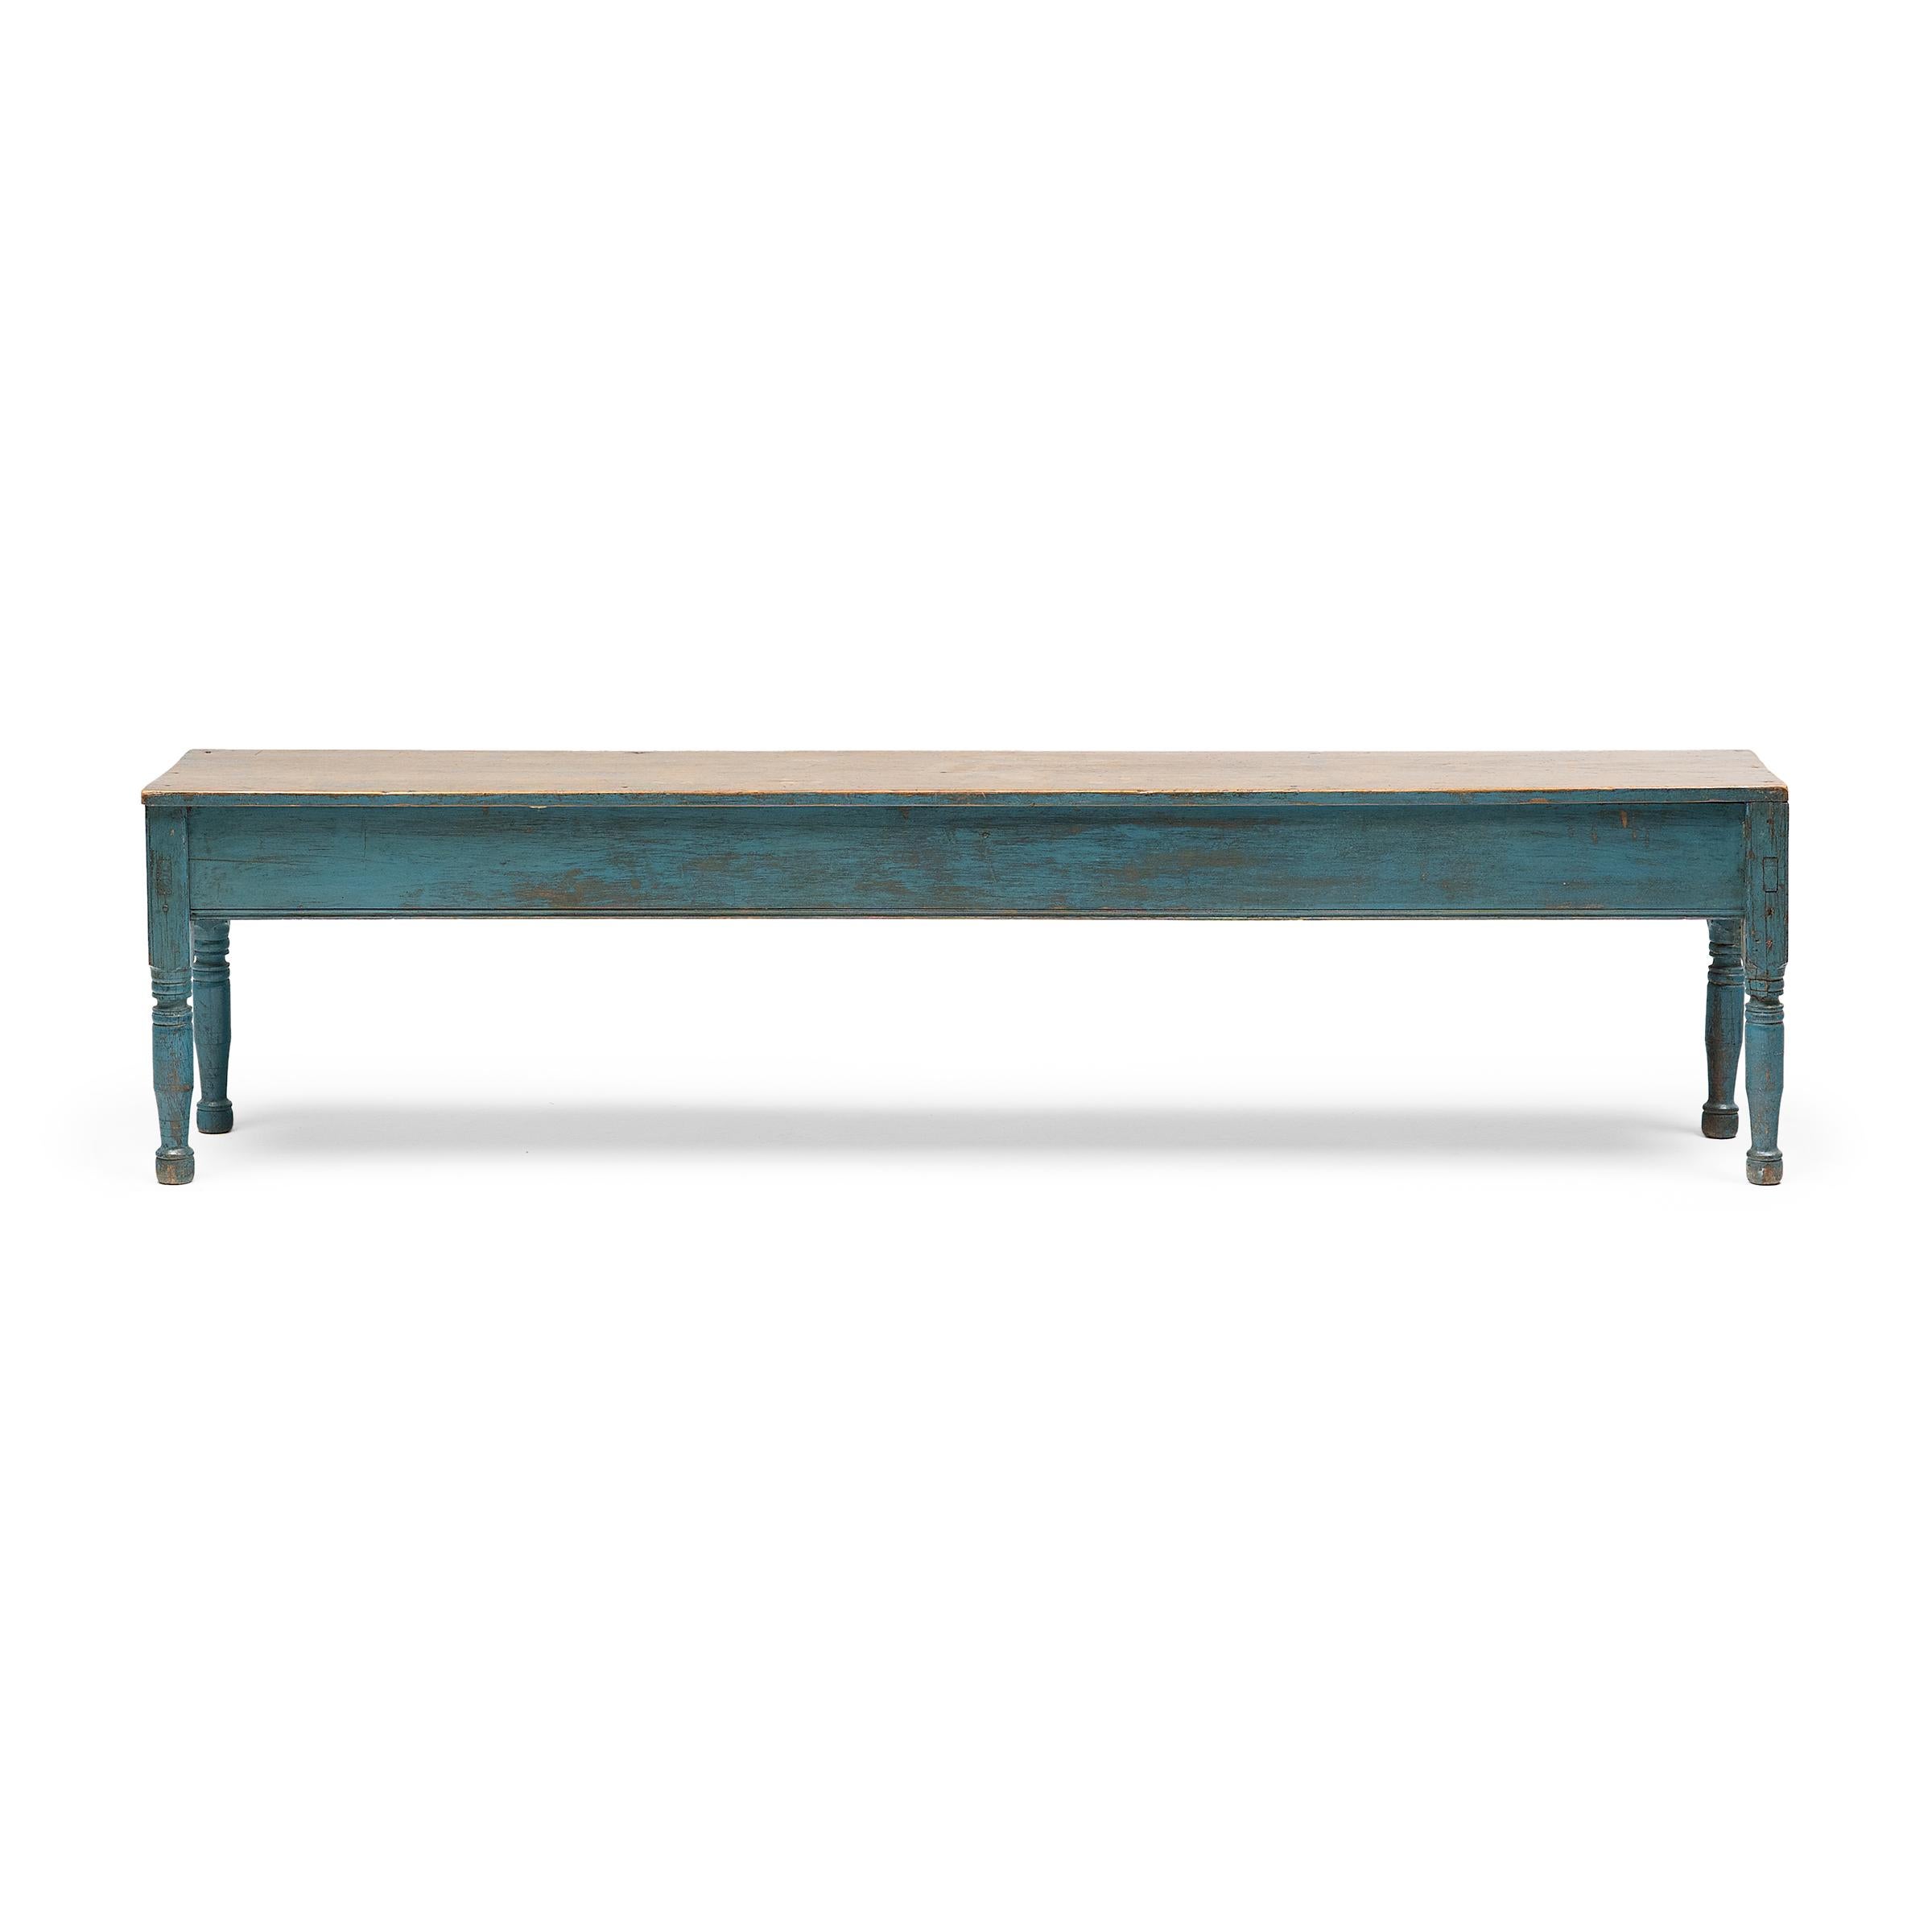 The painted exterior of this provincial farmhouse bench has weathered gradually from years of use to achieve the ultimate rustic finish. Once a vibrant, robin’s egg blue, the milk paint has softened with time to a subdued color and well-worn finish,